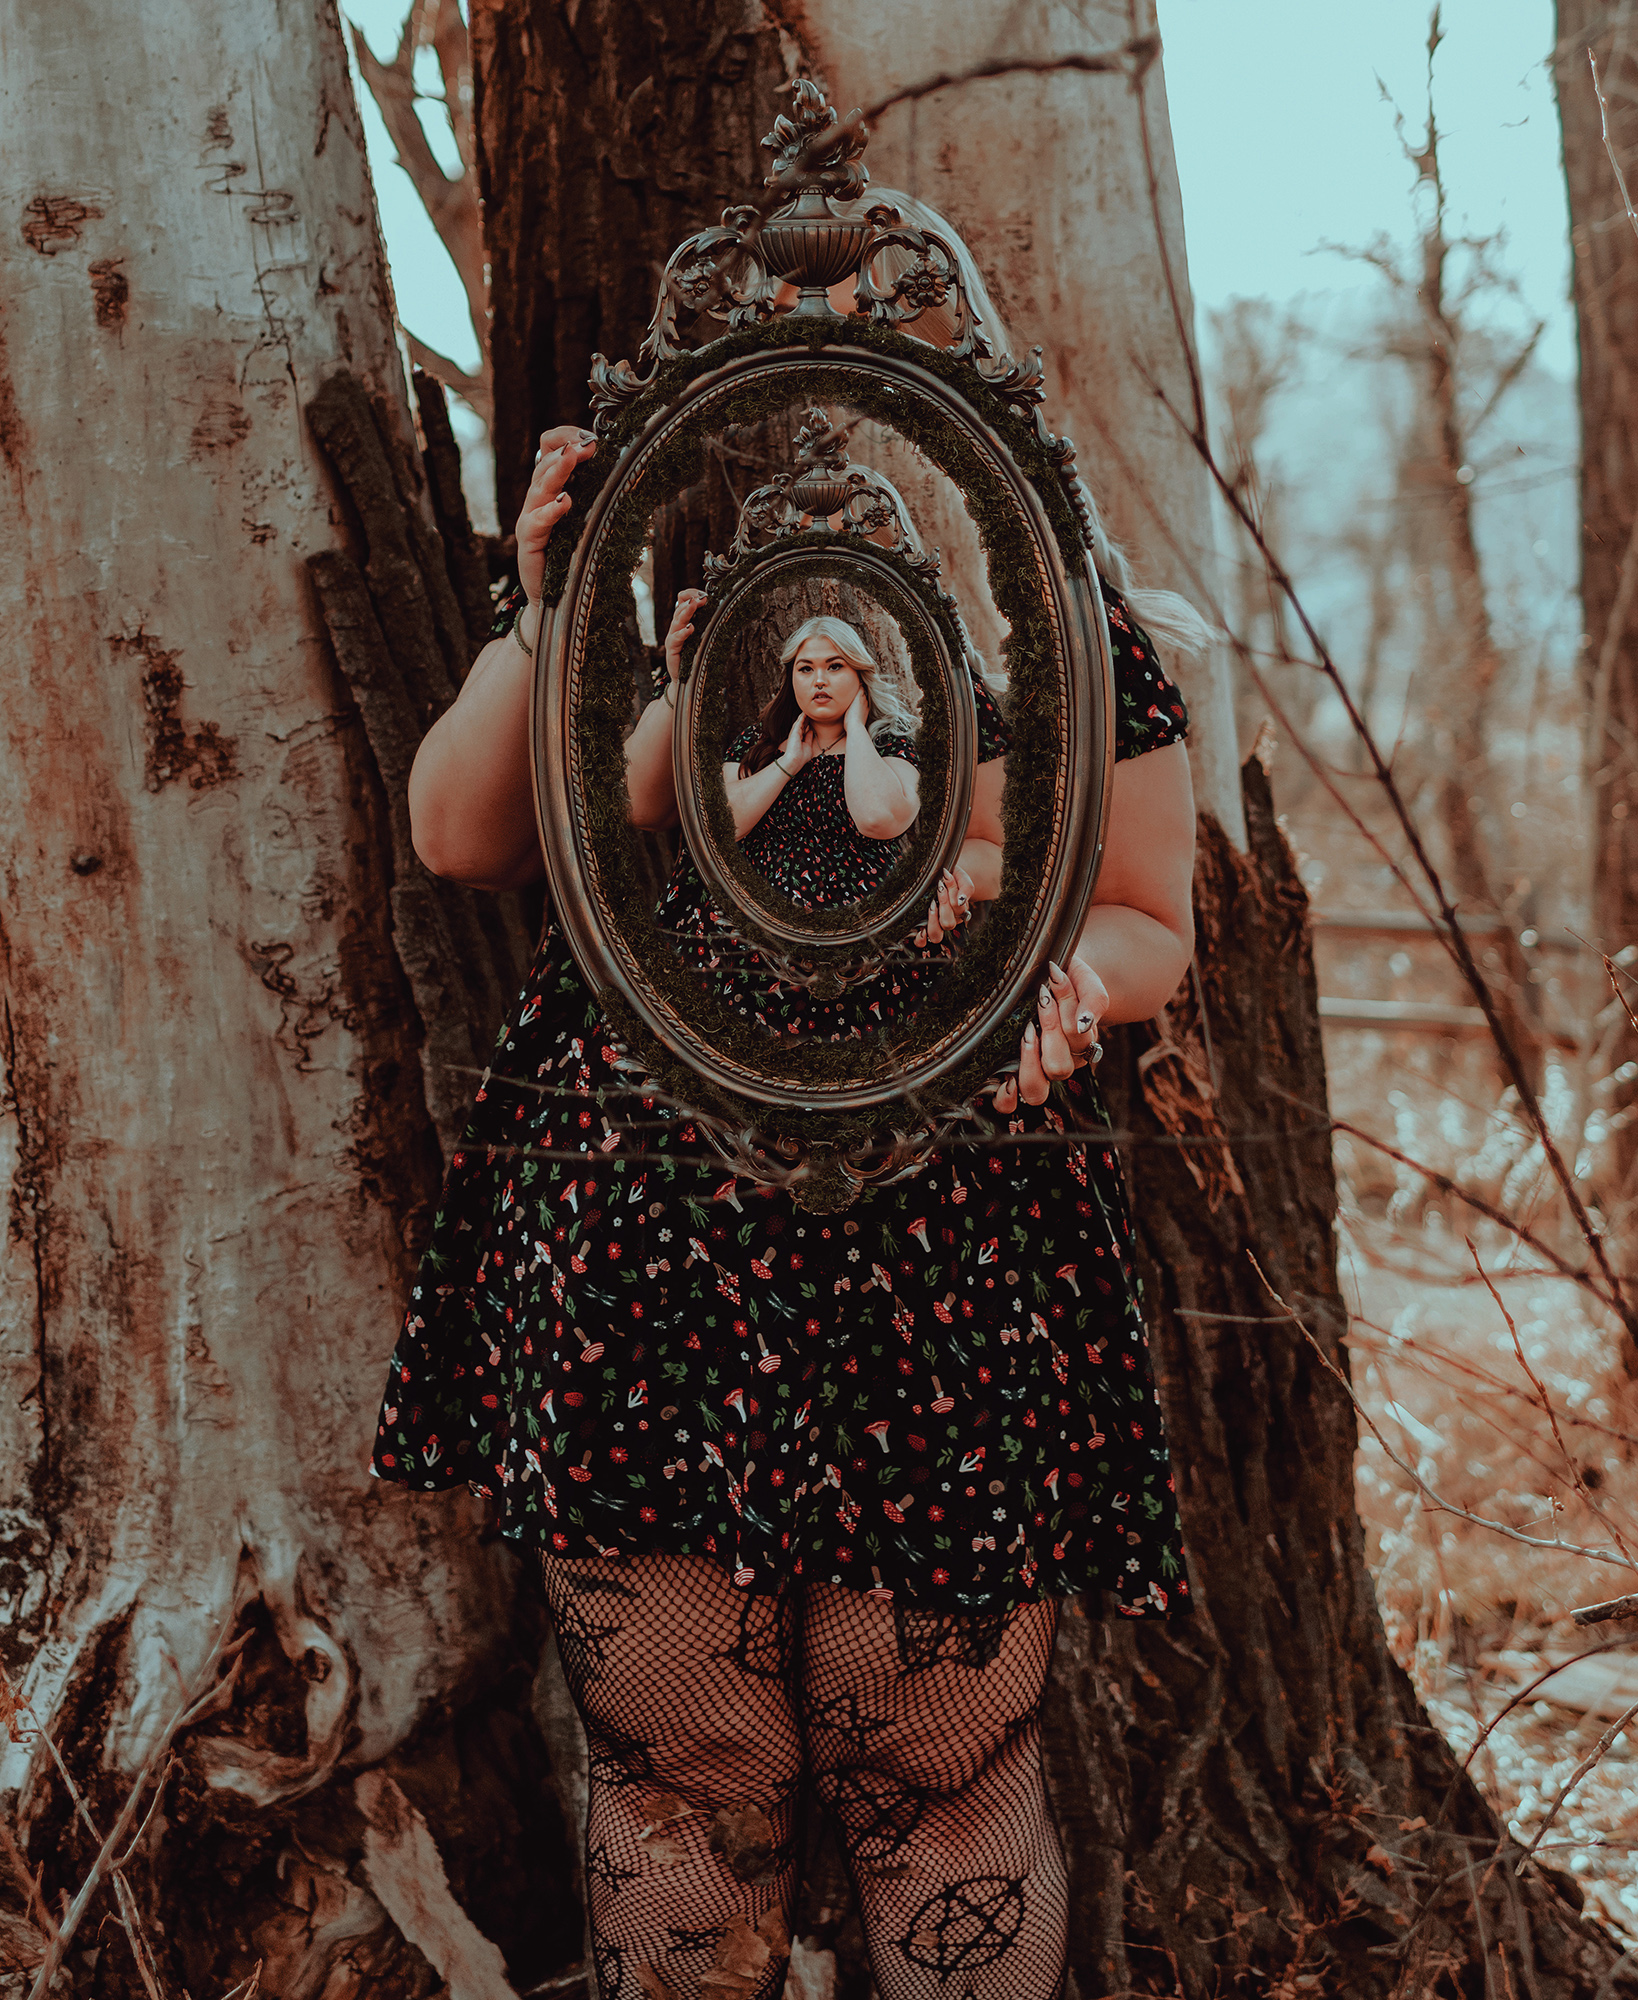 A person in a black floral dress stands behind a tree trunk holding an ornate gold mirror reflecting their face and upper body. The background is a forest with bare trees and dry leaves on the ground. The image has a warm, vintage tone